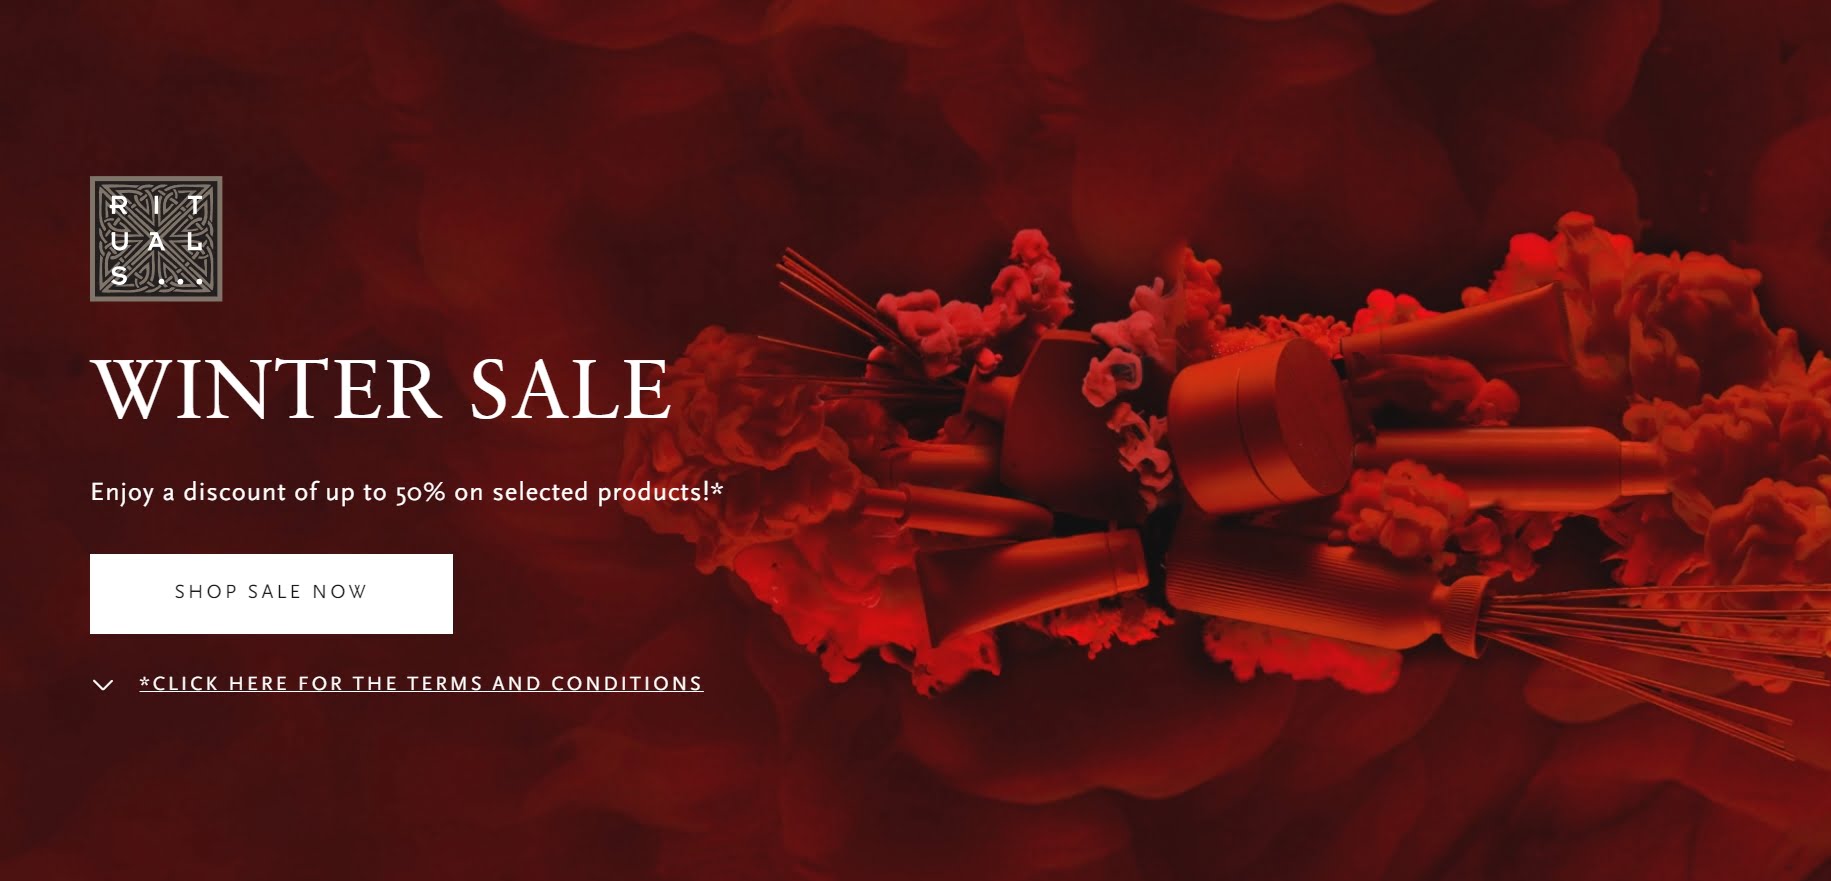 Rituals Winter Sale: Up to 50% off selected products